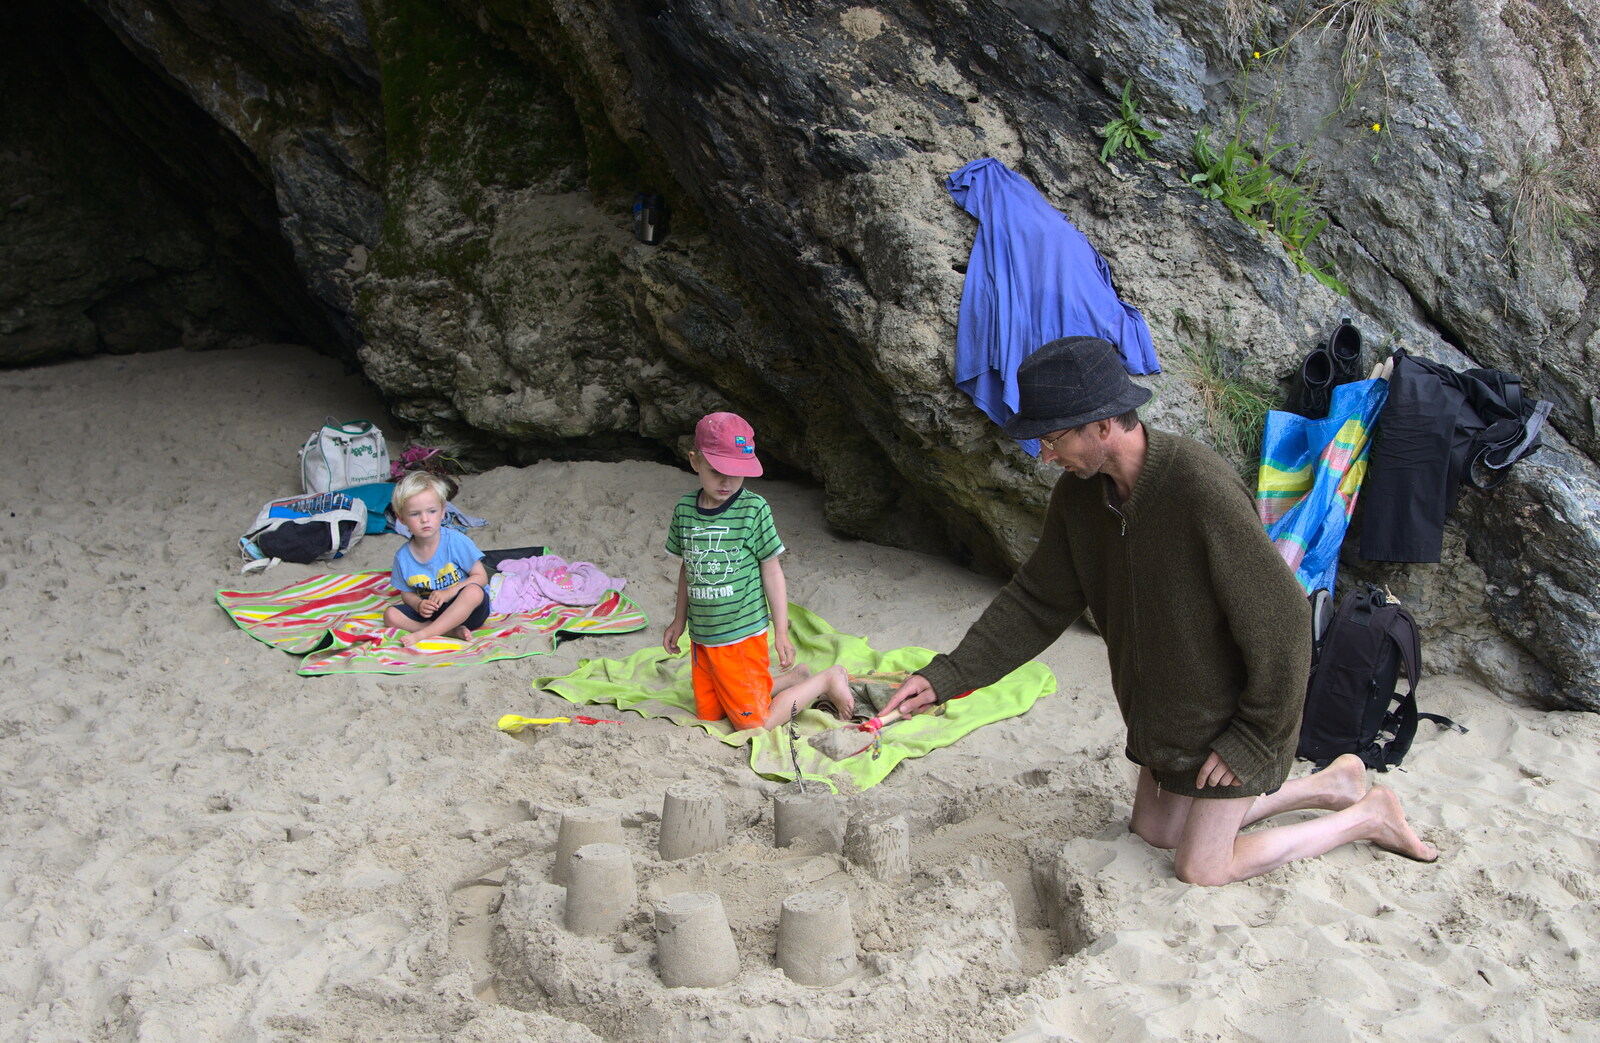 Philly builds some sandcastles from Camping at Silver Strand, Wicklow, County Wicklow, Ireland - 7th August 2014